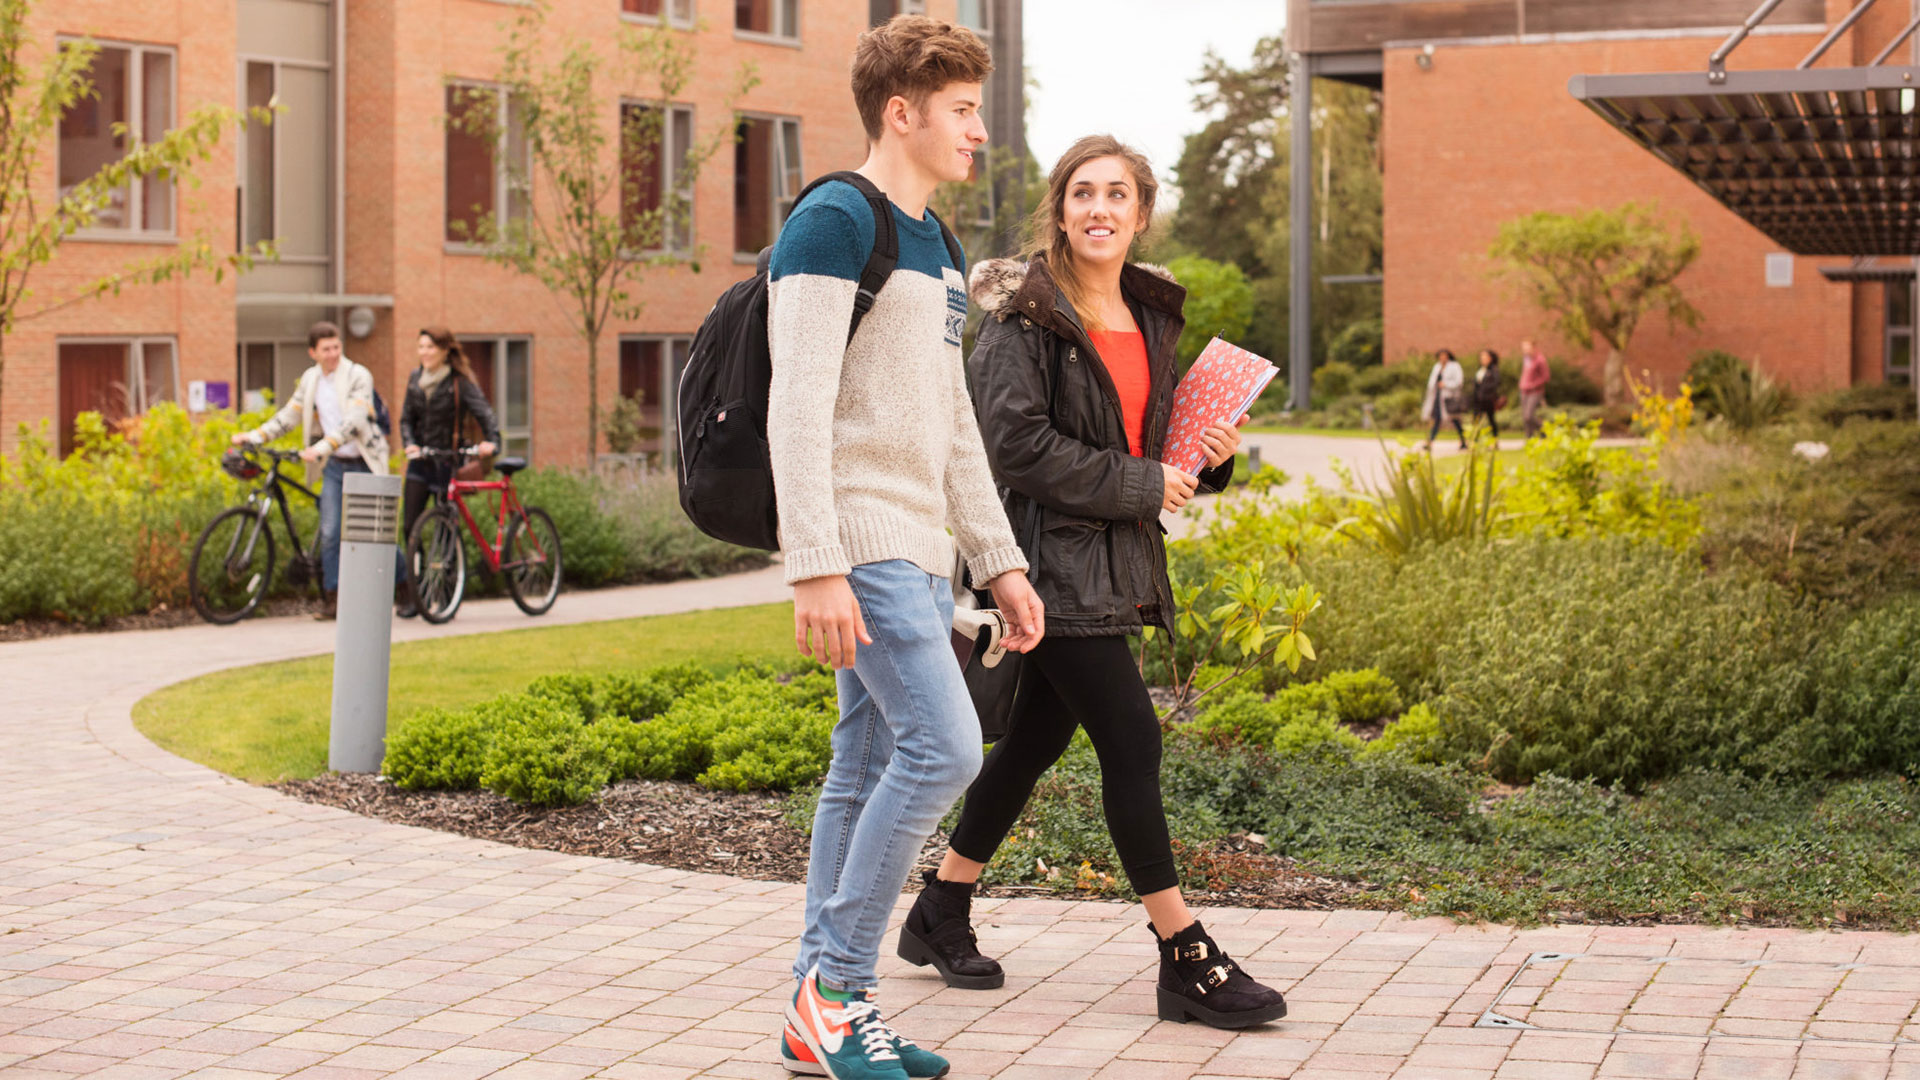 Two students walking through campus together